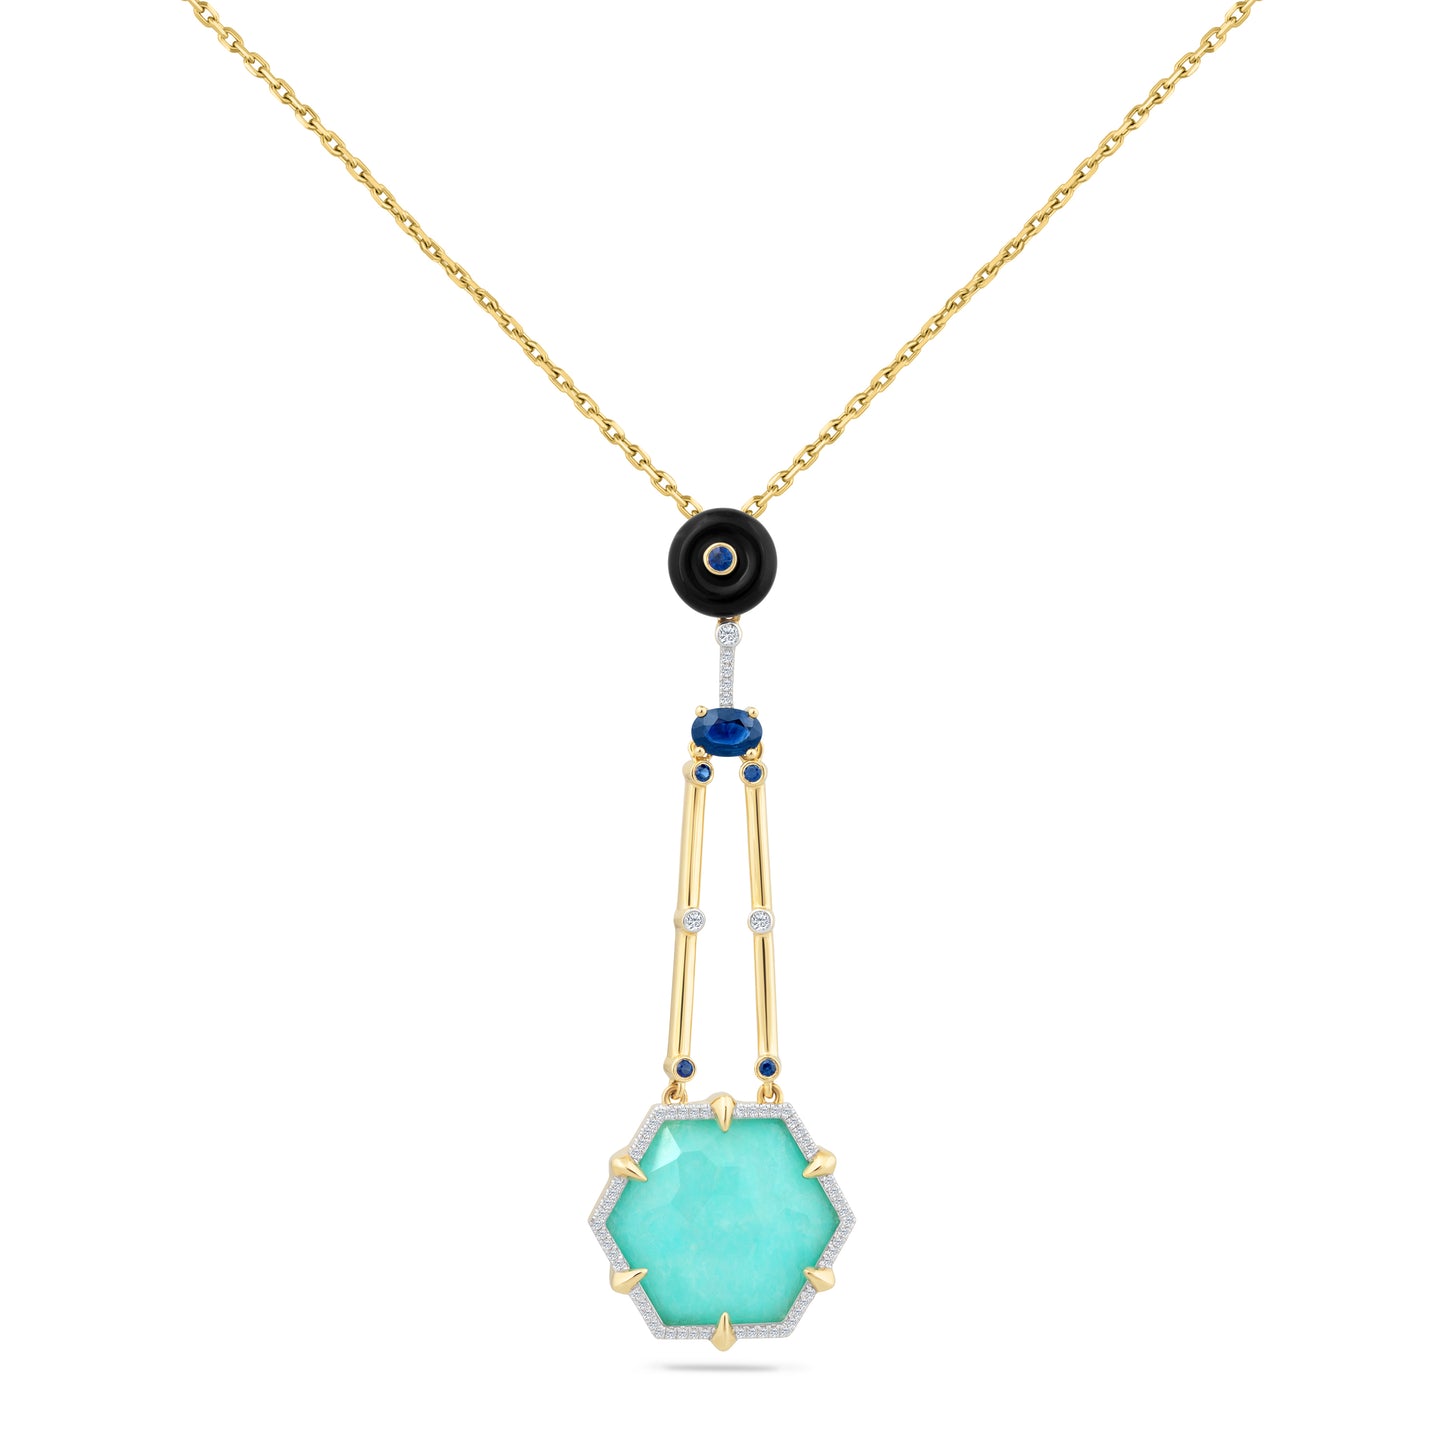 14K LONG HEXAGON SHAPED PENDANT WITH 61 DIAMONDS 0.25CT, 6 SAPPHIRES 0.70CT, 1 BLACK ONYX 1.00CT, 1 AMAZONITE 1.00CT & 1 CRYSTAL 1.00CT ON 18 INCHES CHAIN